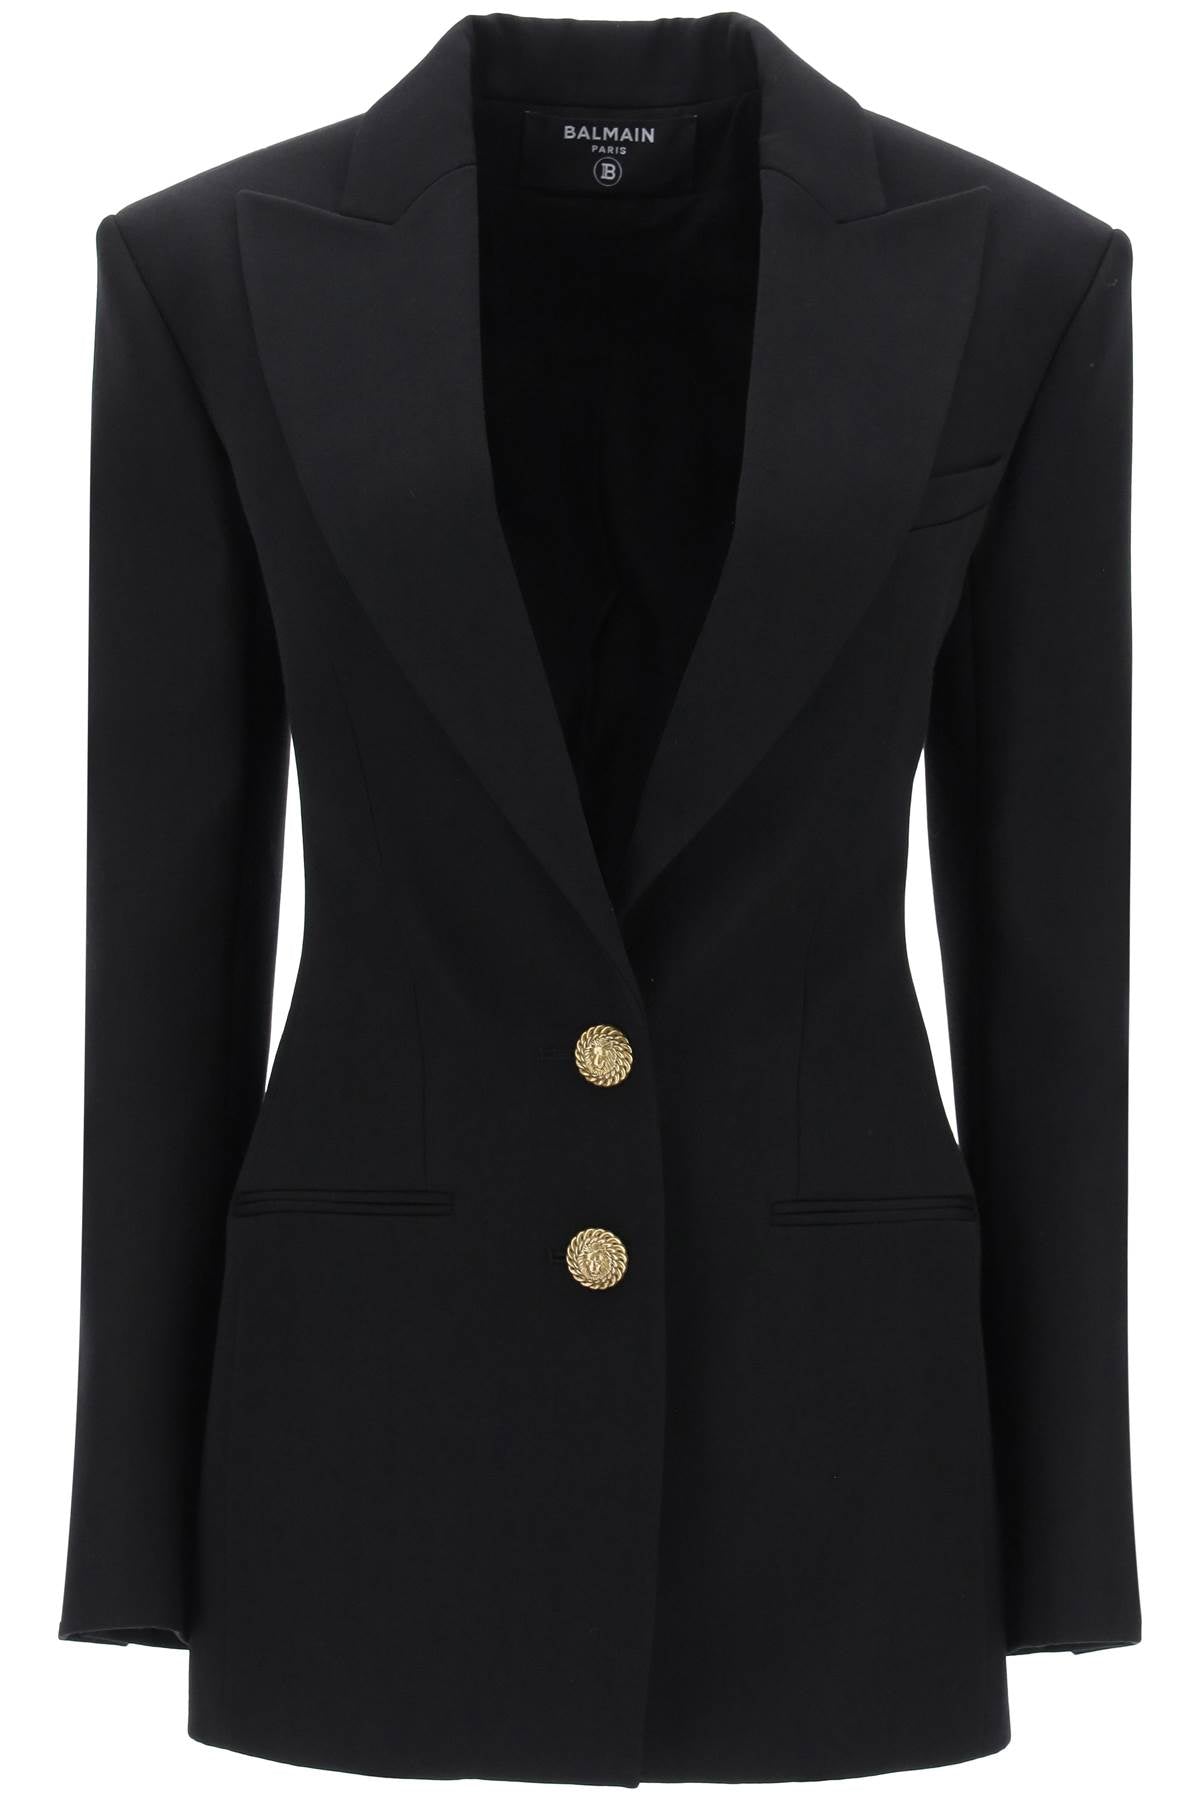 BALMAIN Black Virgin Wool Single-Breasted Jacket with Gold-Tone Lion Buttons for Women